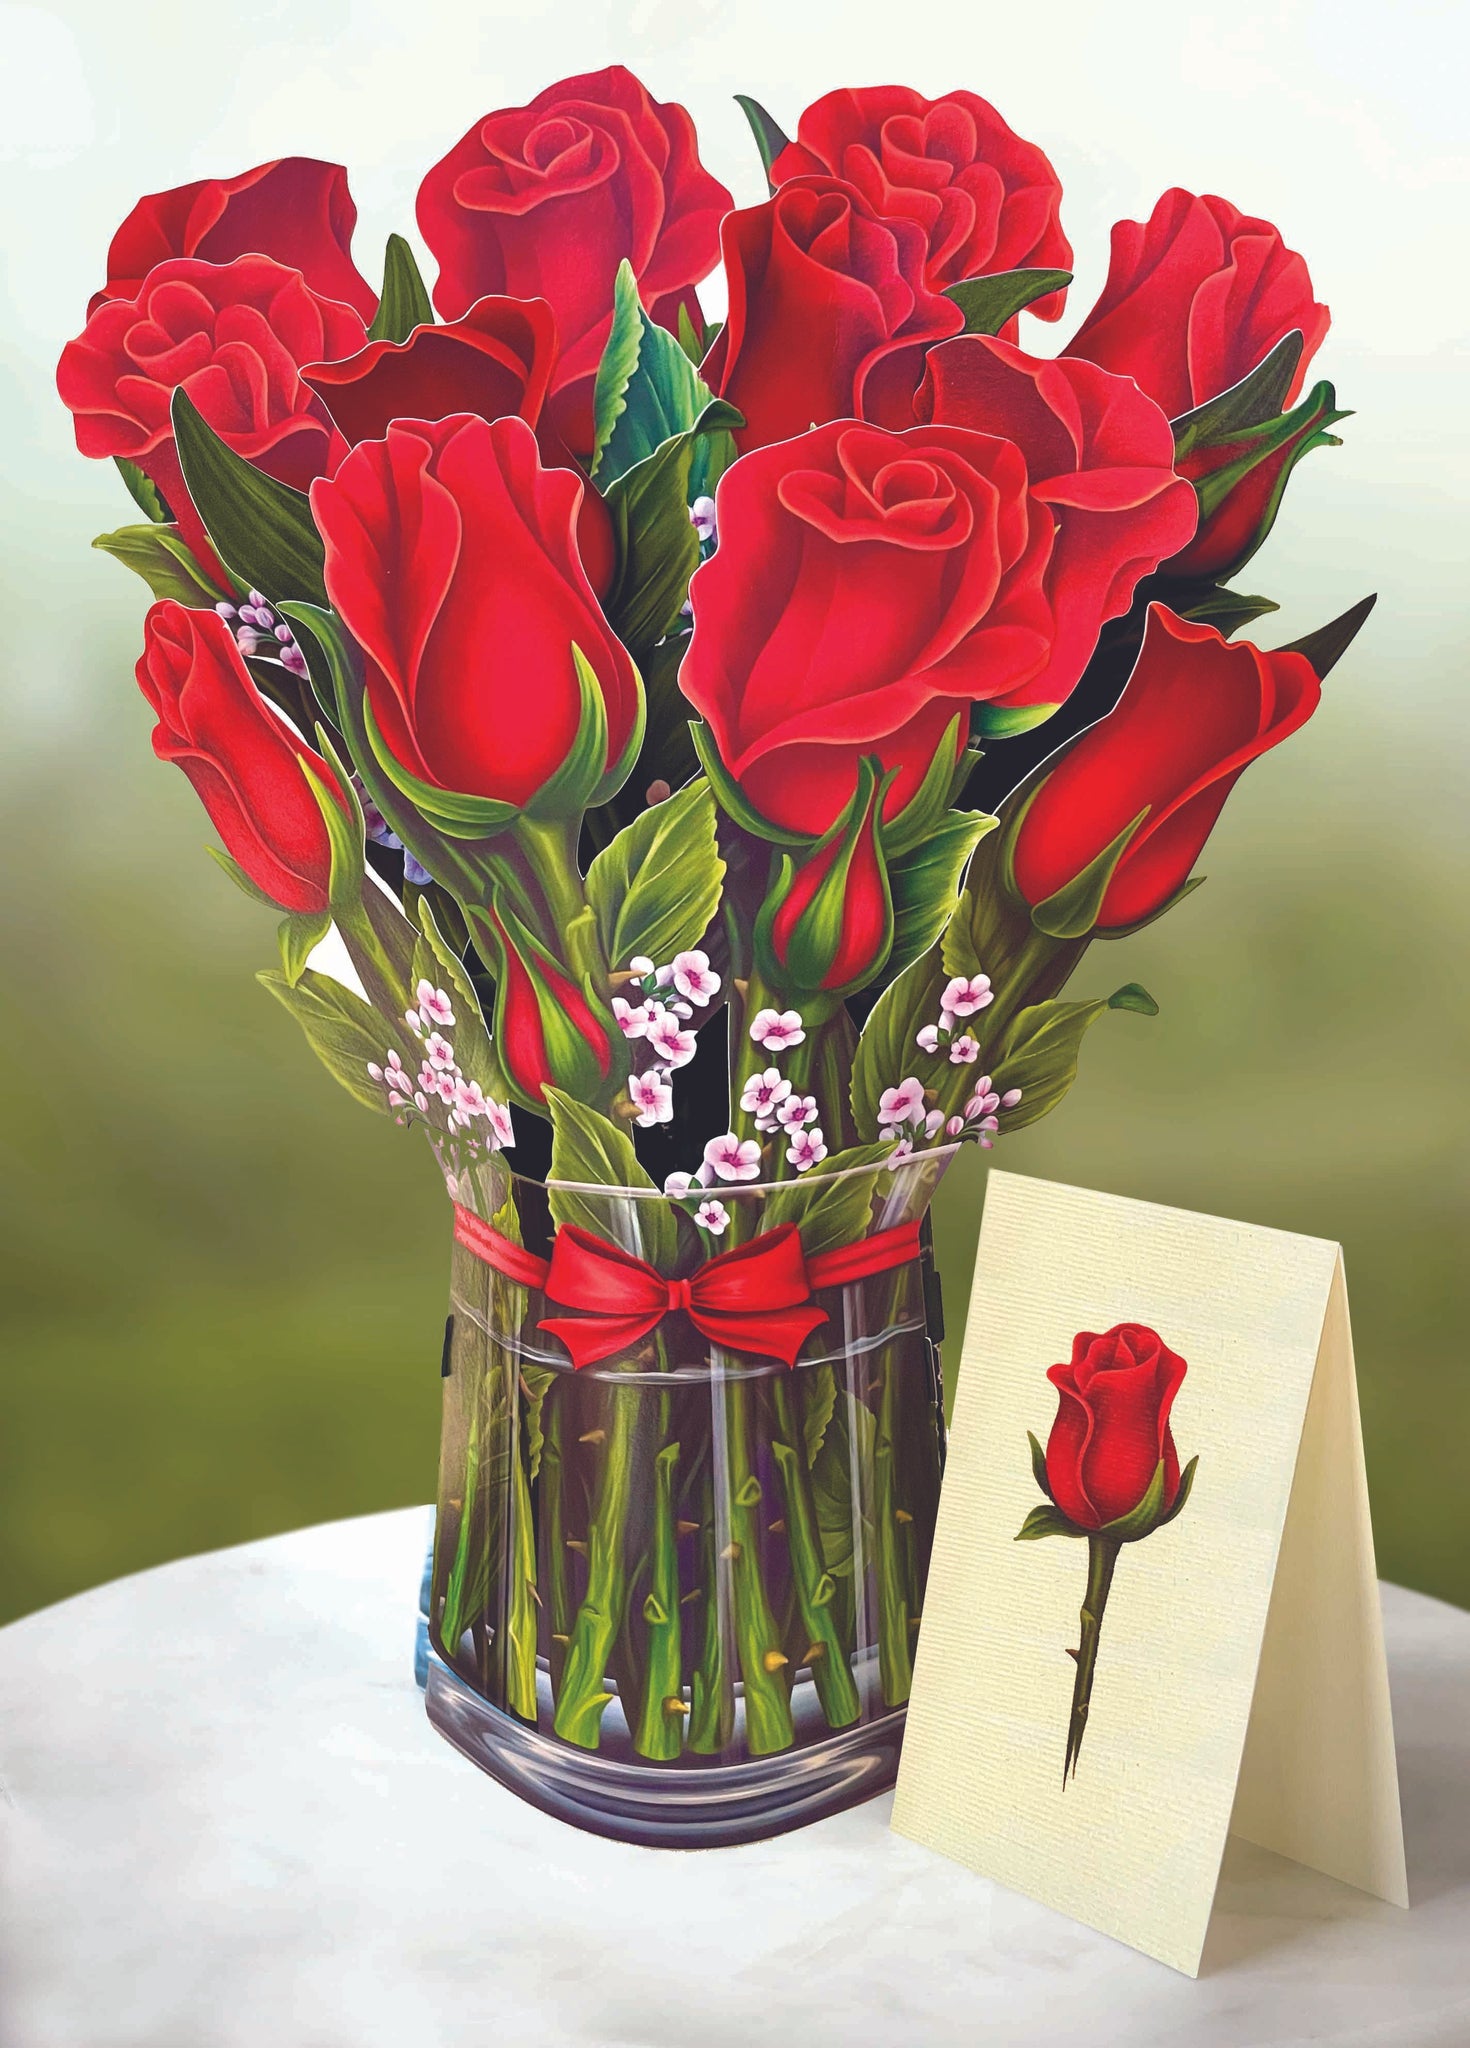 Pop Up Flower Bouquet - Red Roses